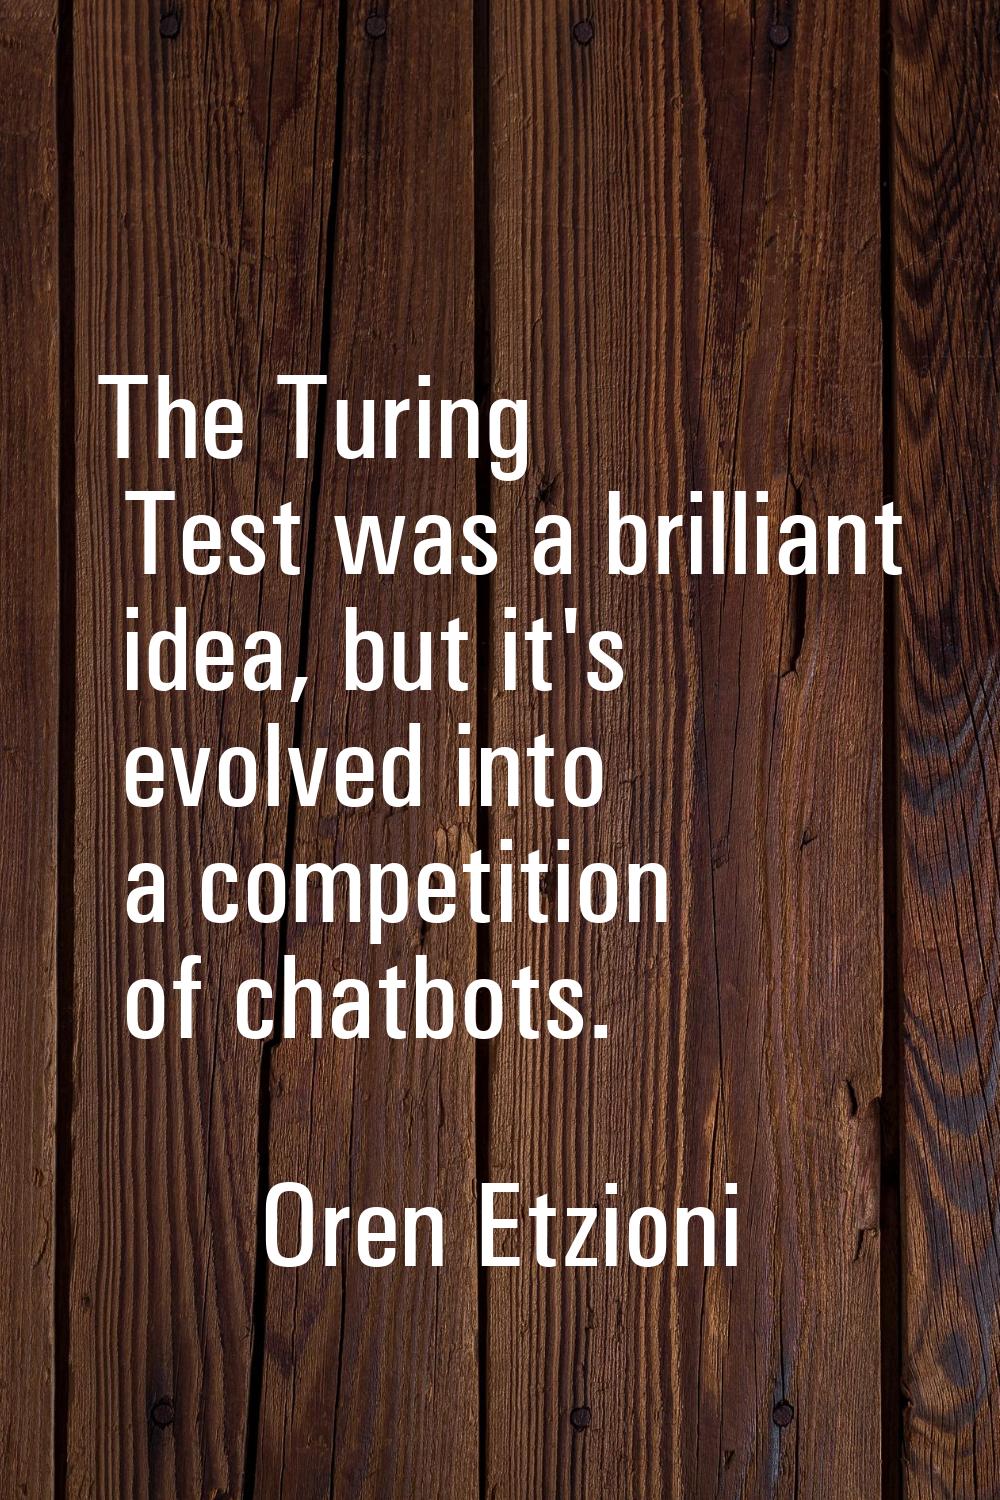 The Turing Test was a brilliant idea, but it's evolved into a competition of chatbots.